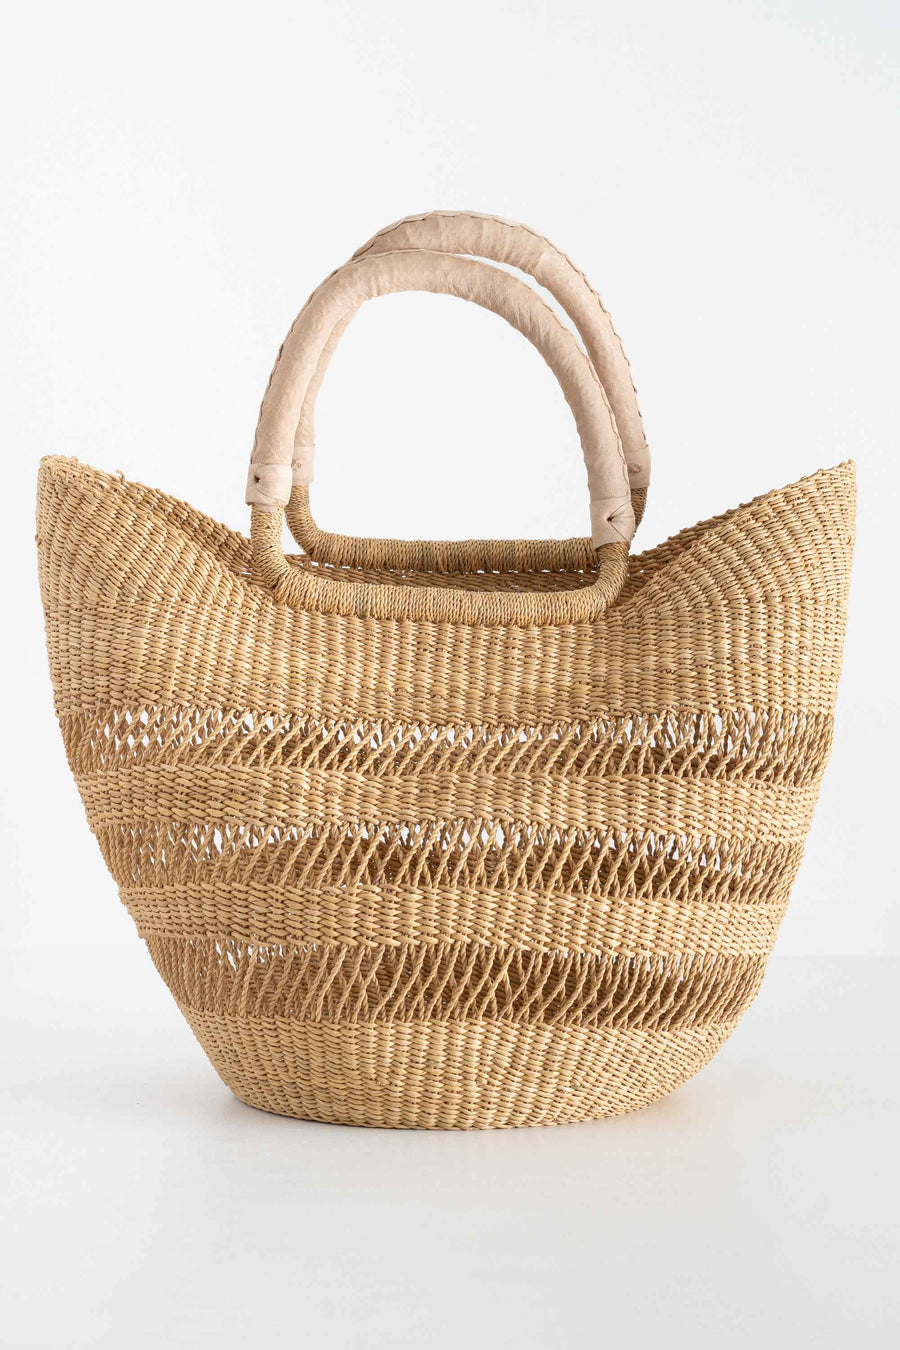 LACE WINGED MARKET BASKET- NATURAL LEATHER HANDLE